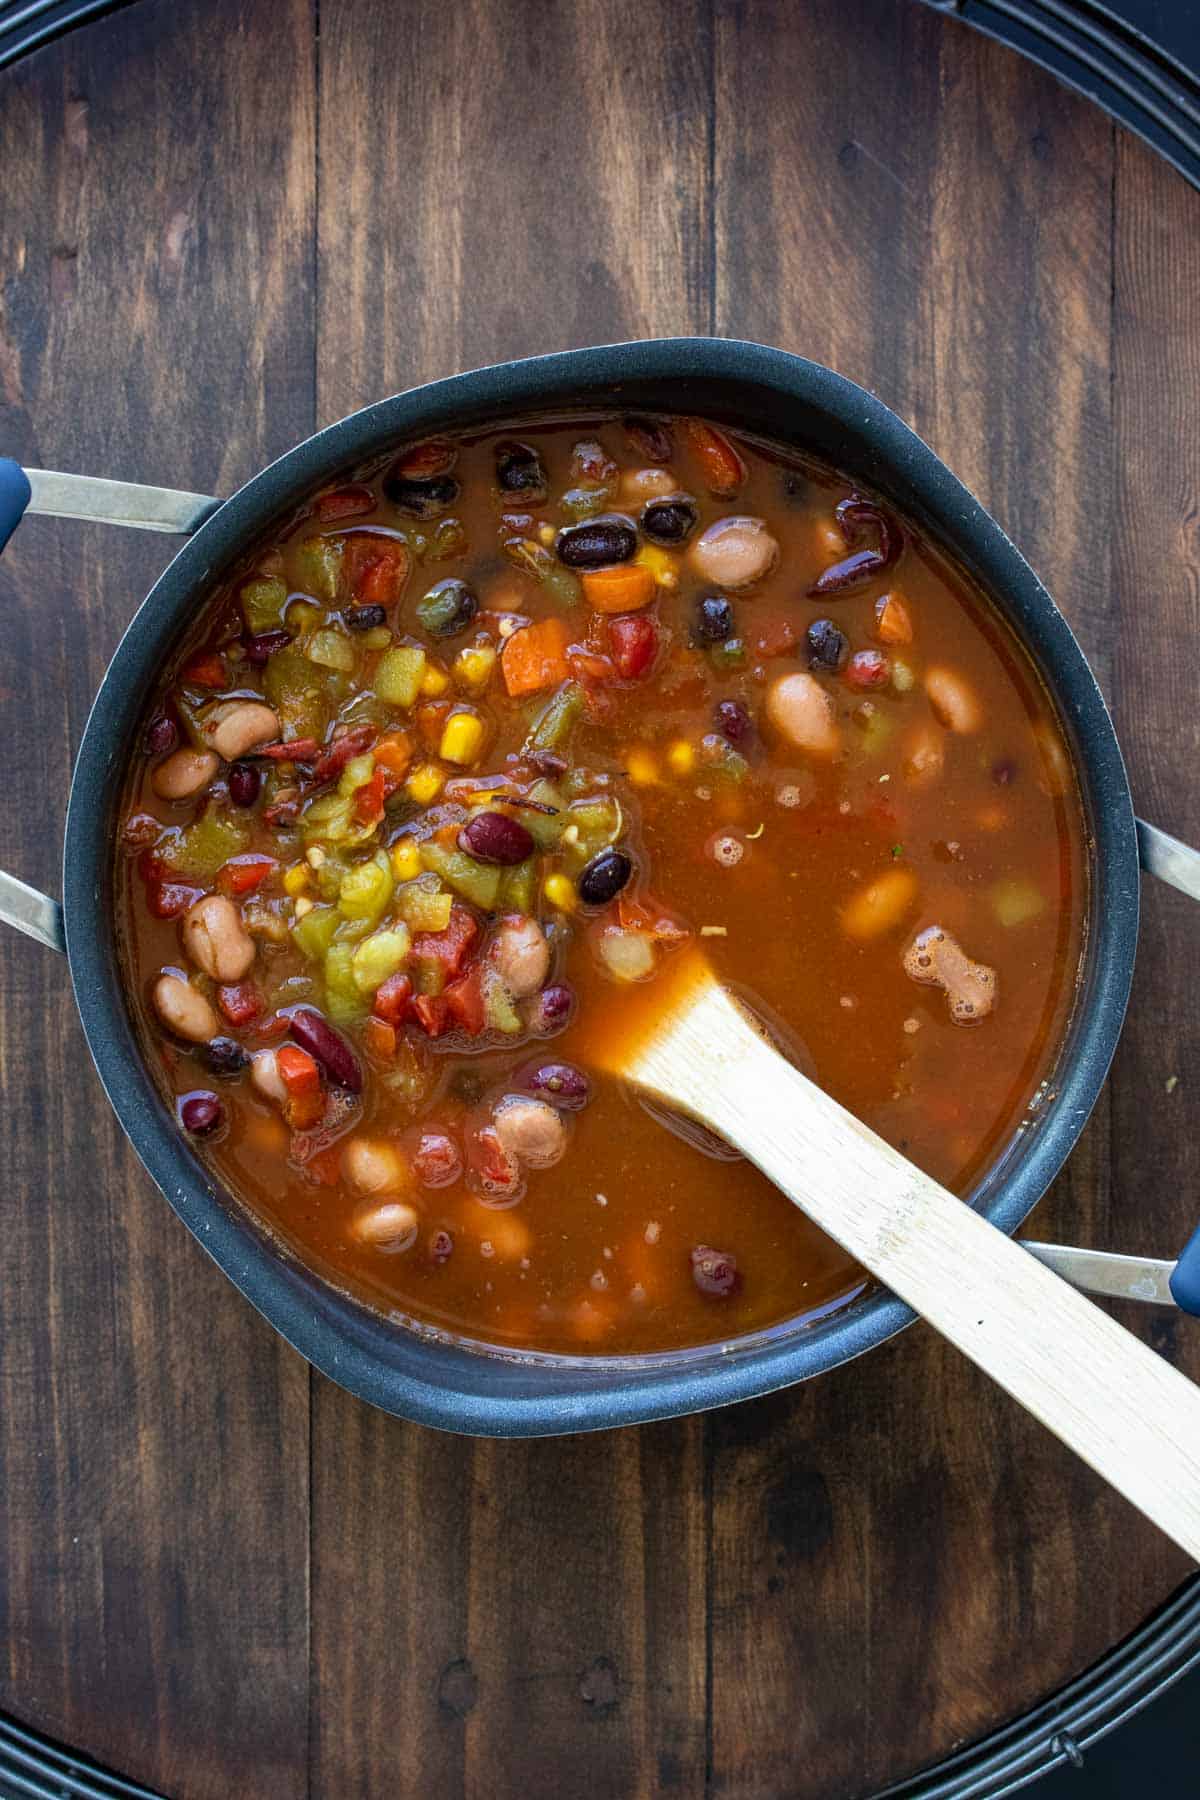 Pot filled with broth, veggies and beans that are being mixed with a wooden spoon